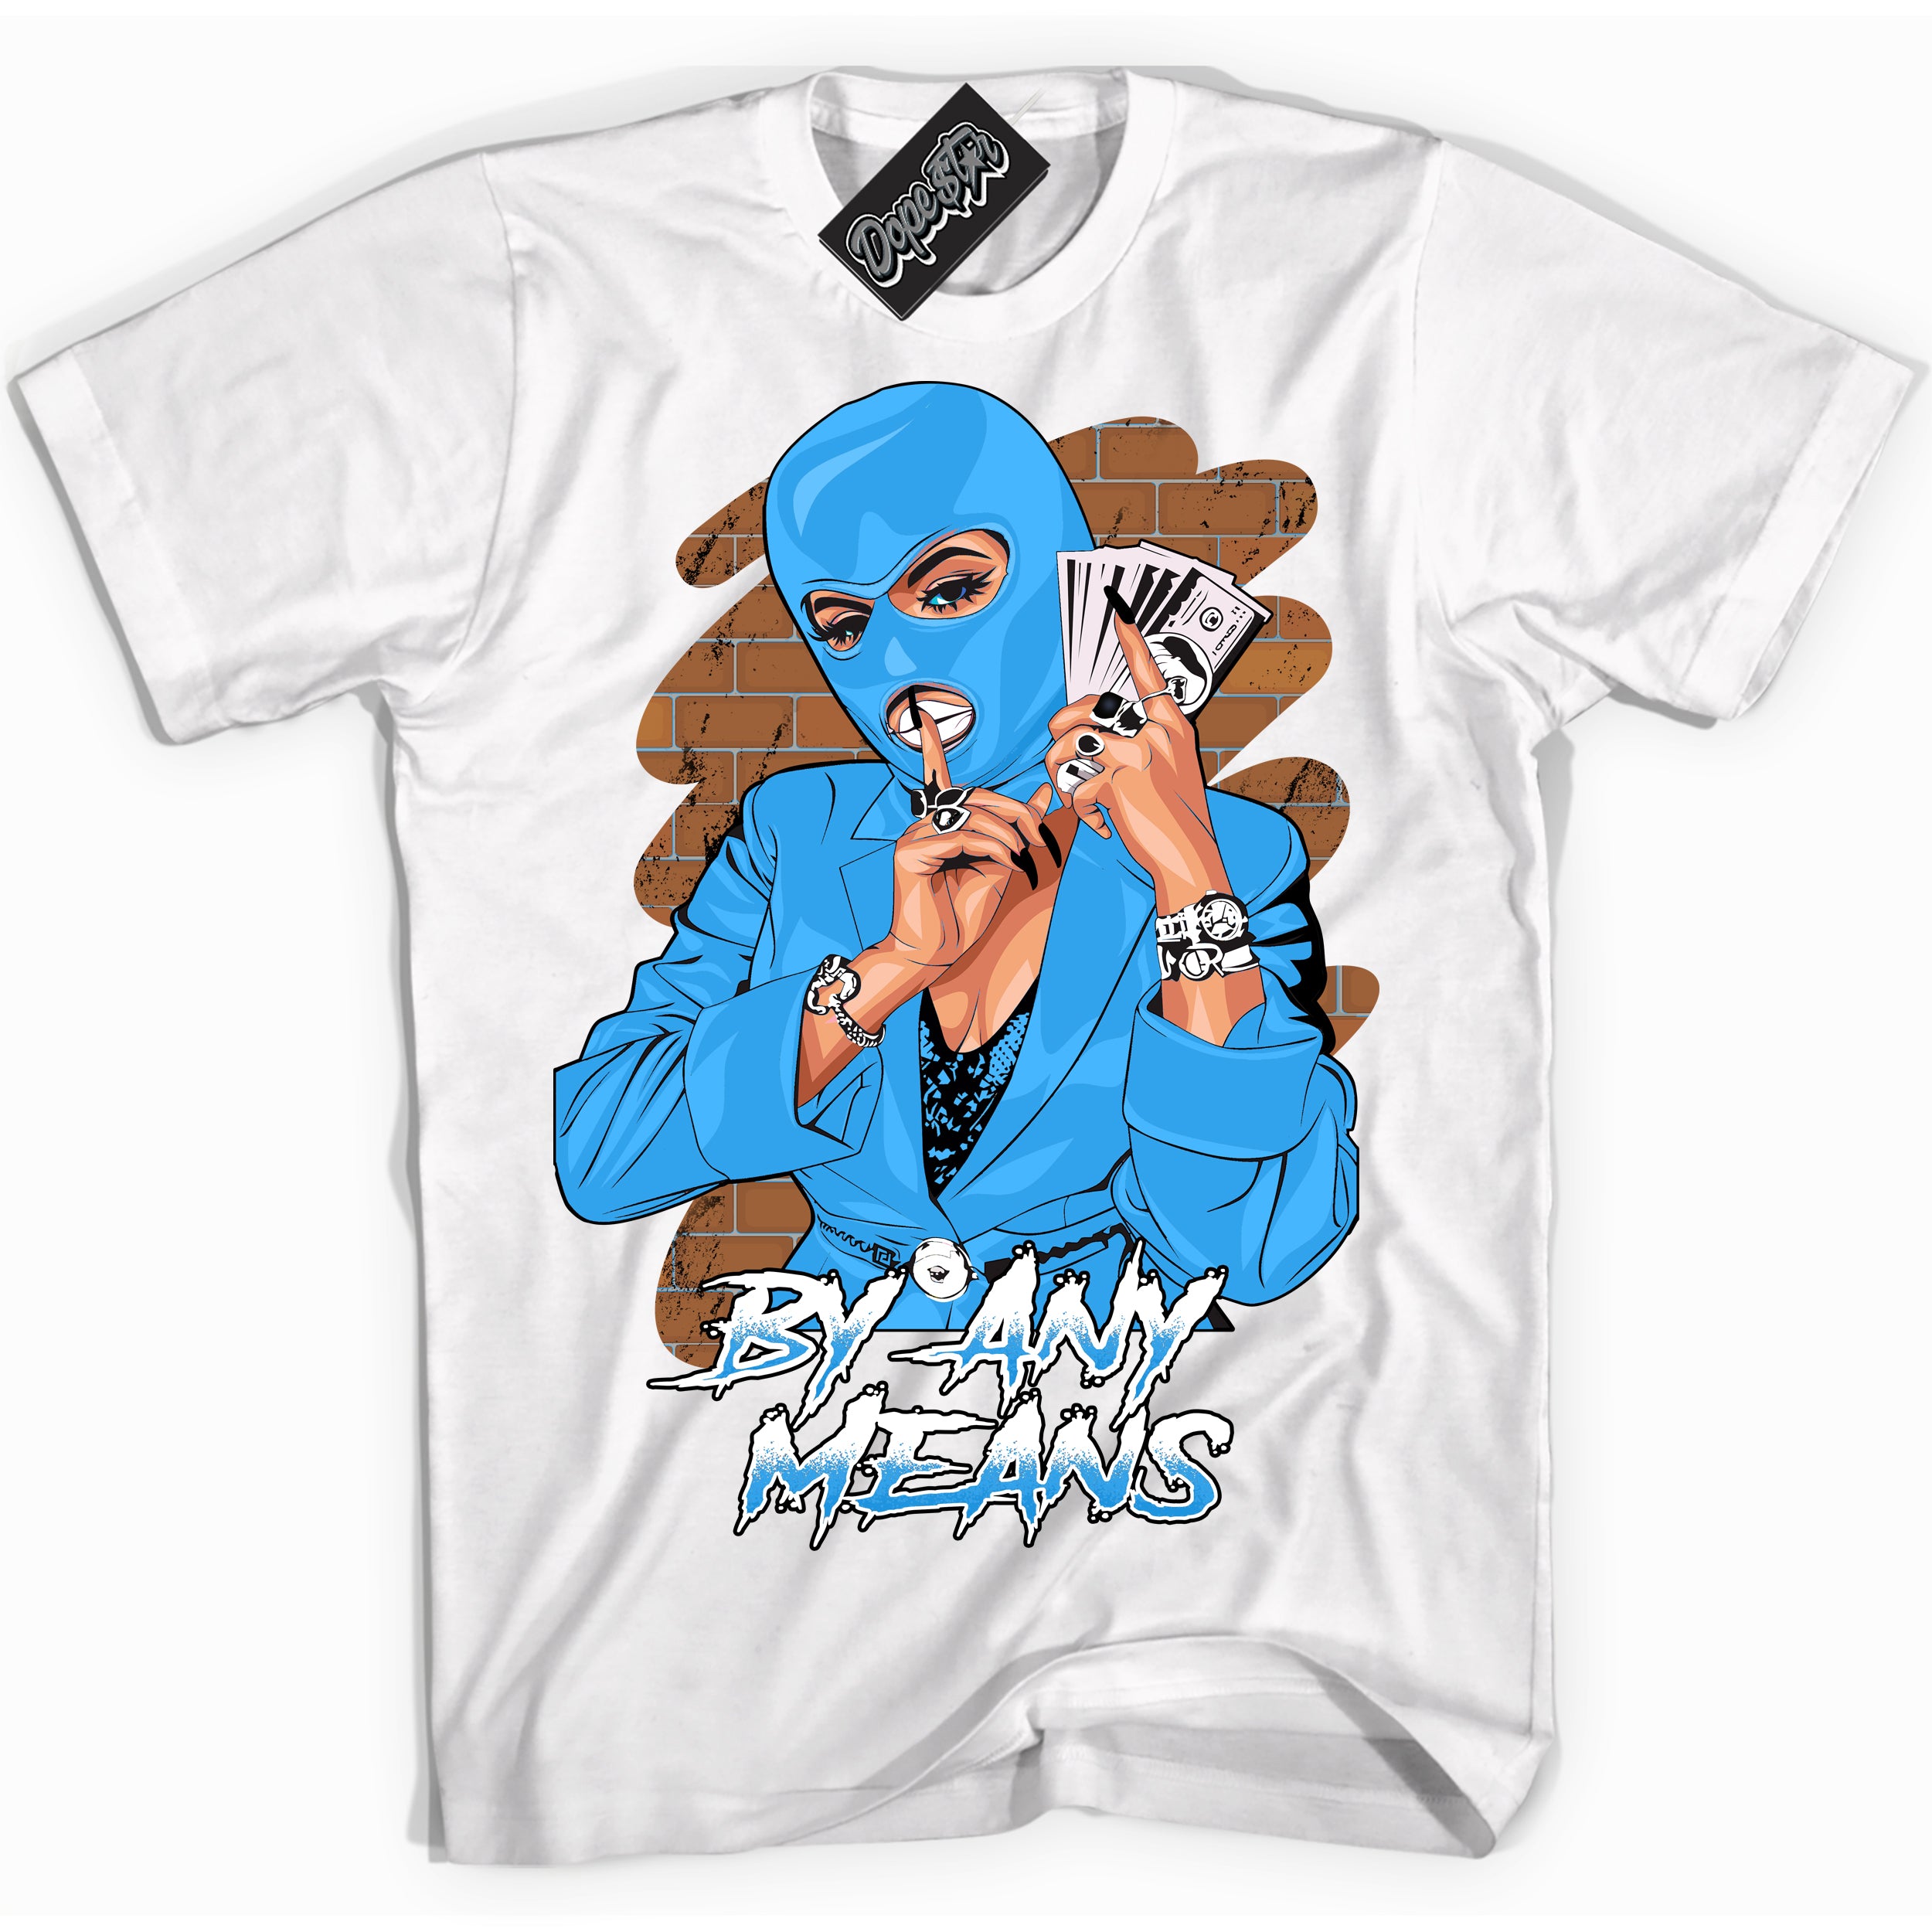 Cool White graphic tee with “ By Any Means ” design, that perfectly matches Powder Blue 9s sneakers 